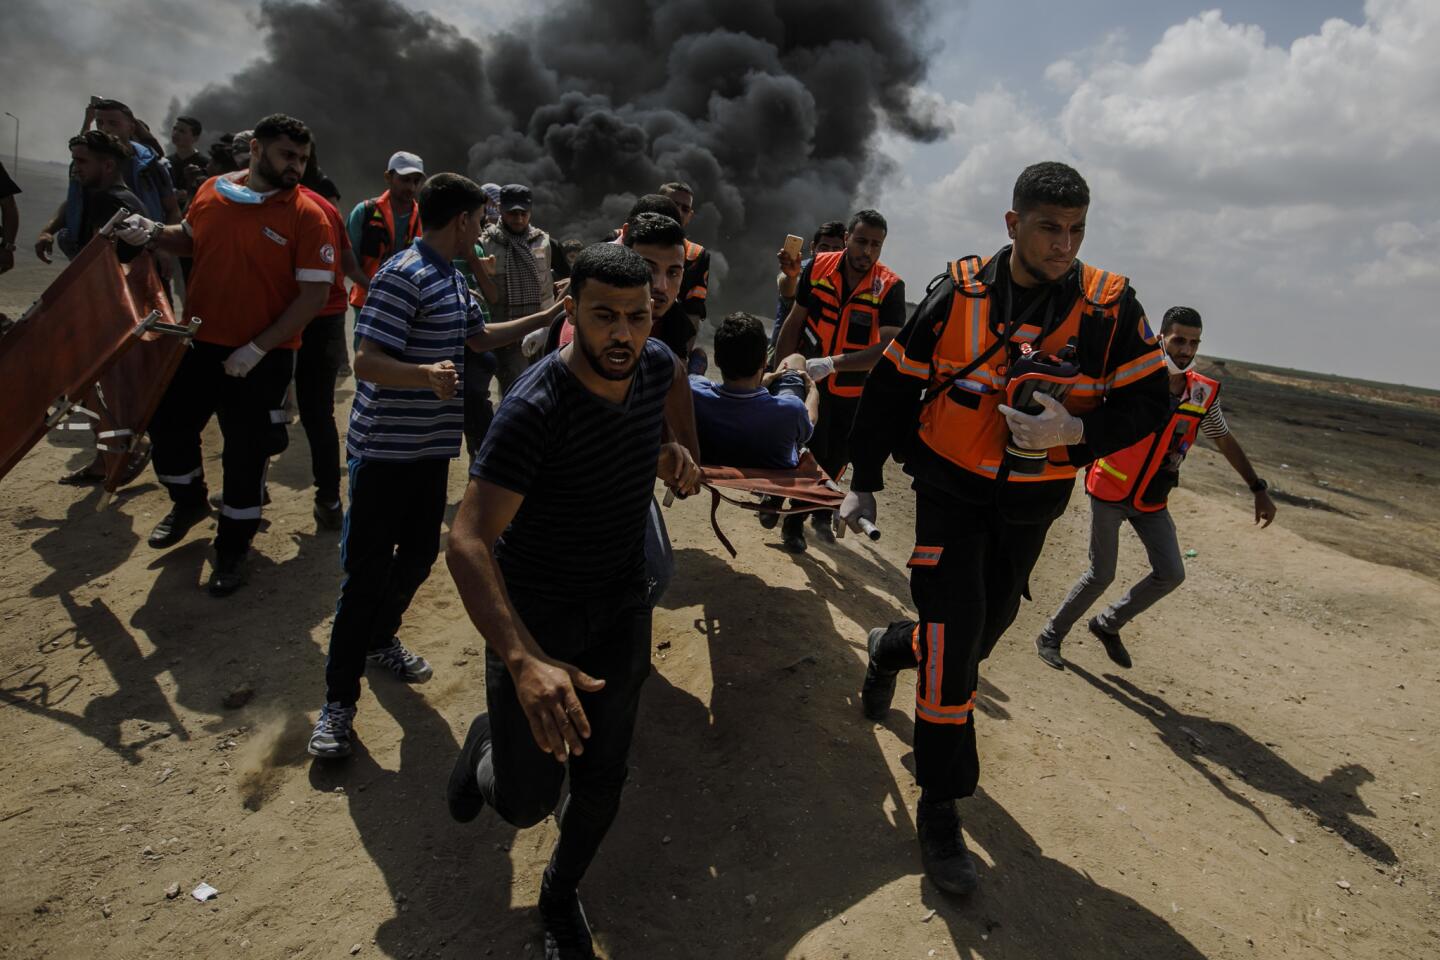 Gaza protests turn deadly